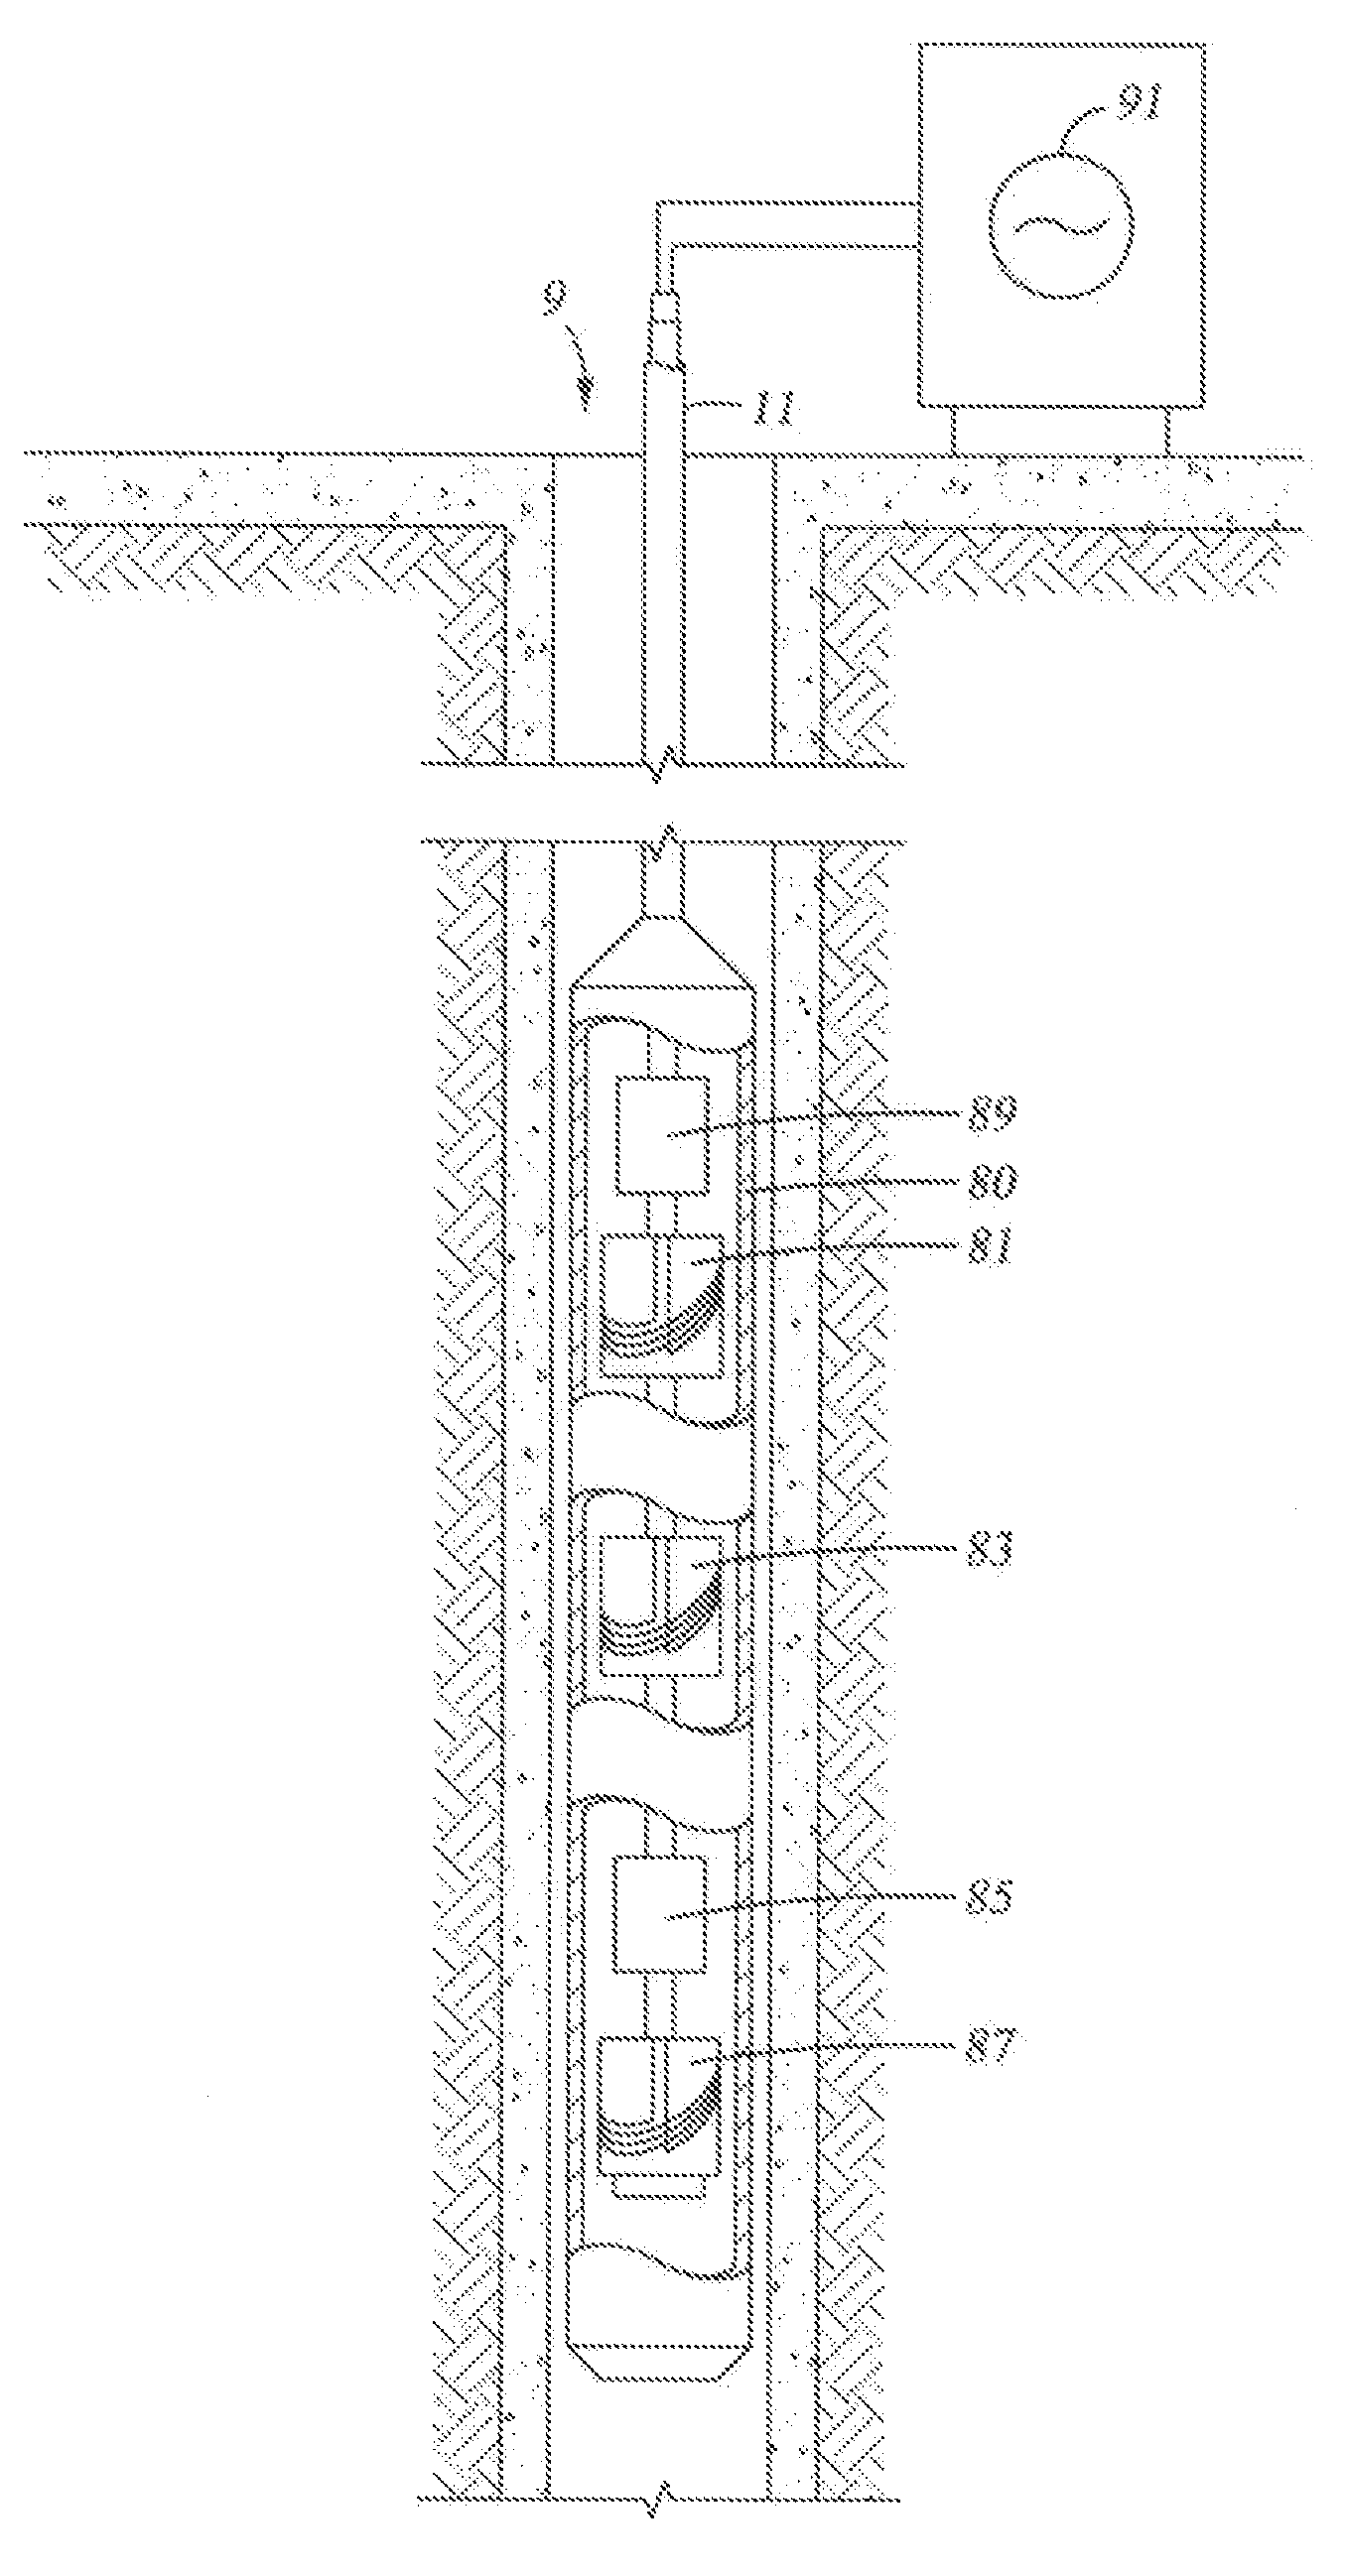 Flexible Circuit for Downhole Antenna